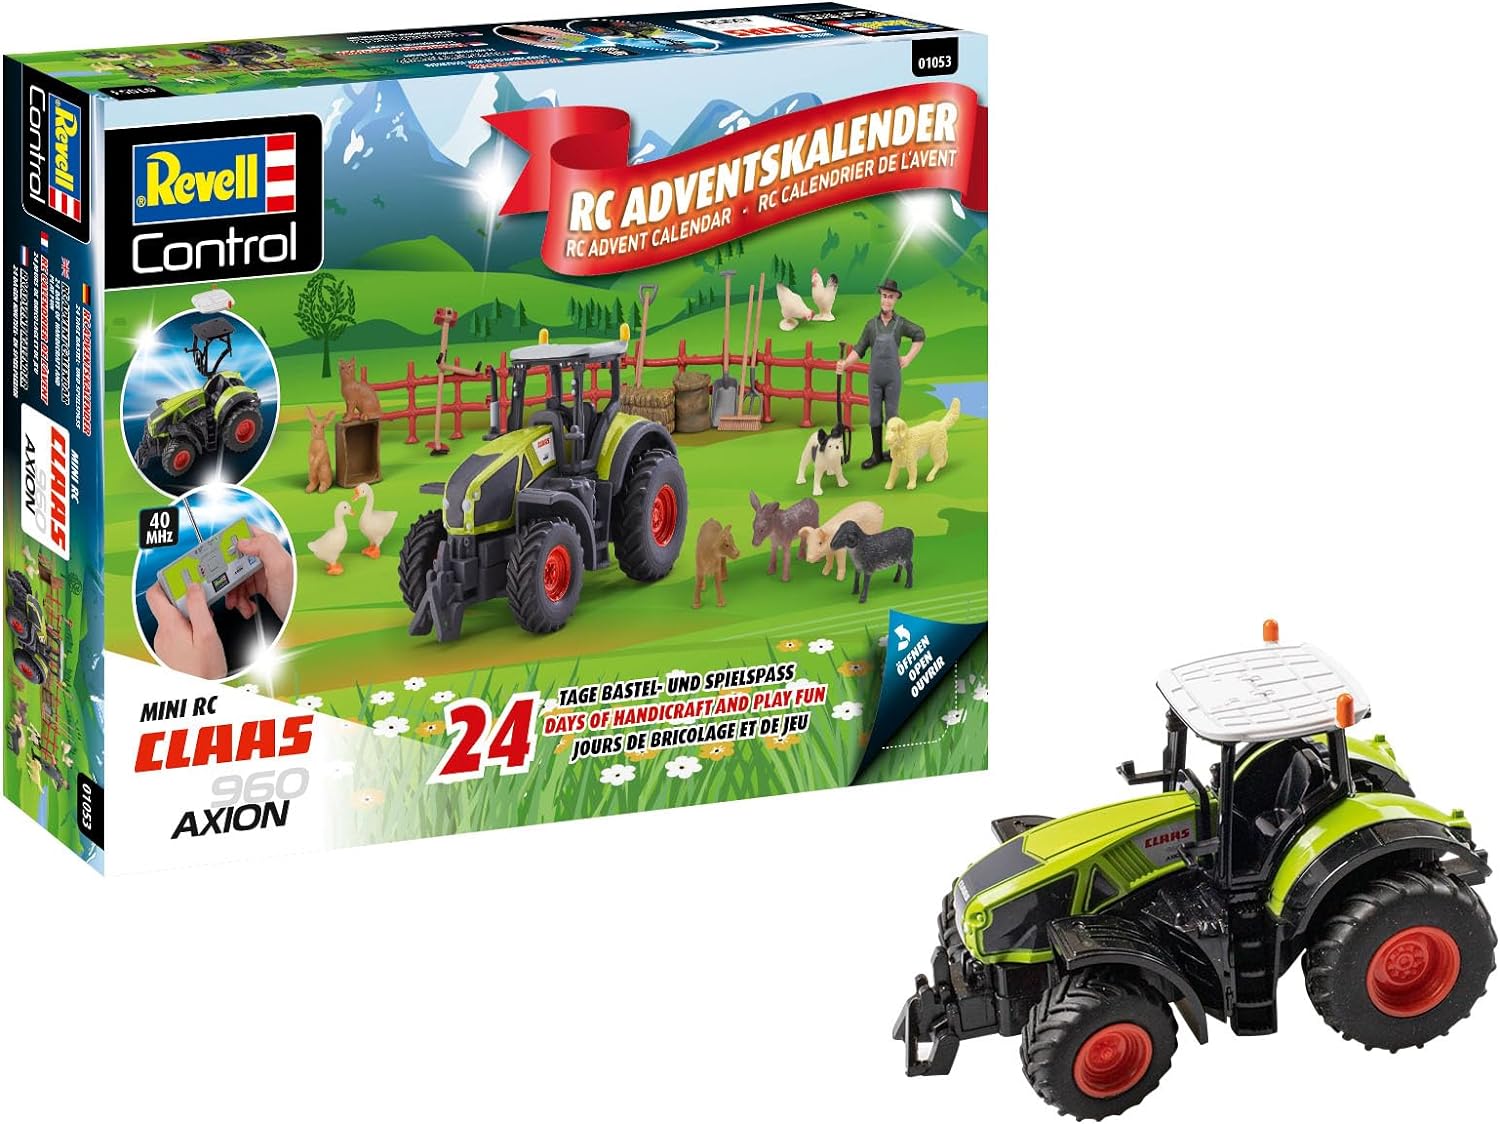 Revell Advent Calendar RC Claas 960 Axio I Claas Tractor I DIY Advent Calendar I Christmas Calendar for Boys, Girls and Adults From 8 Years I Tractor Assemble in 24 Days